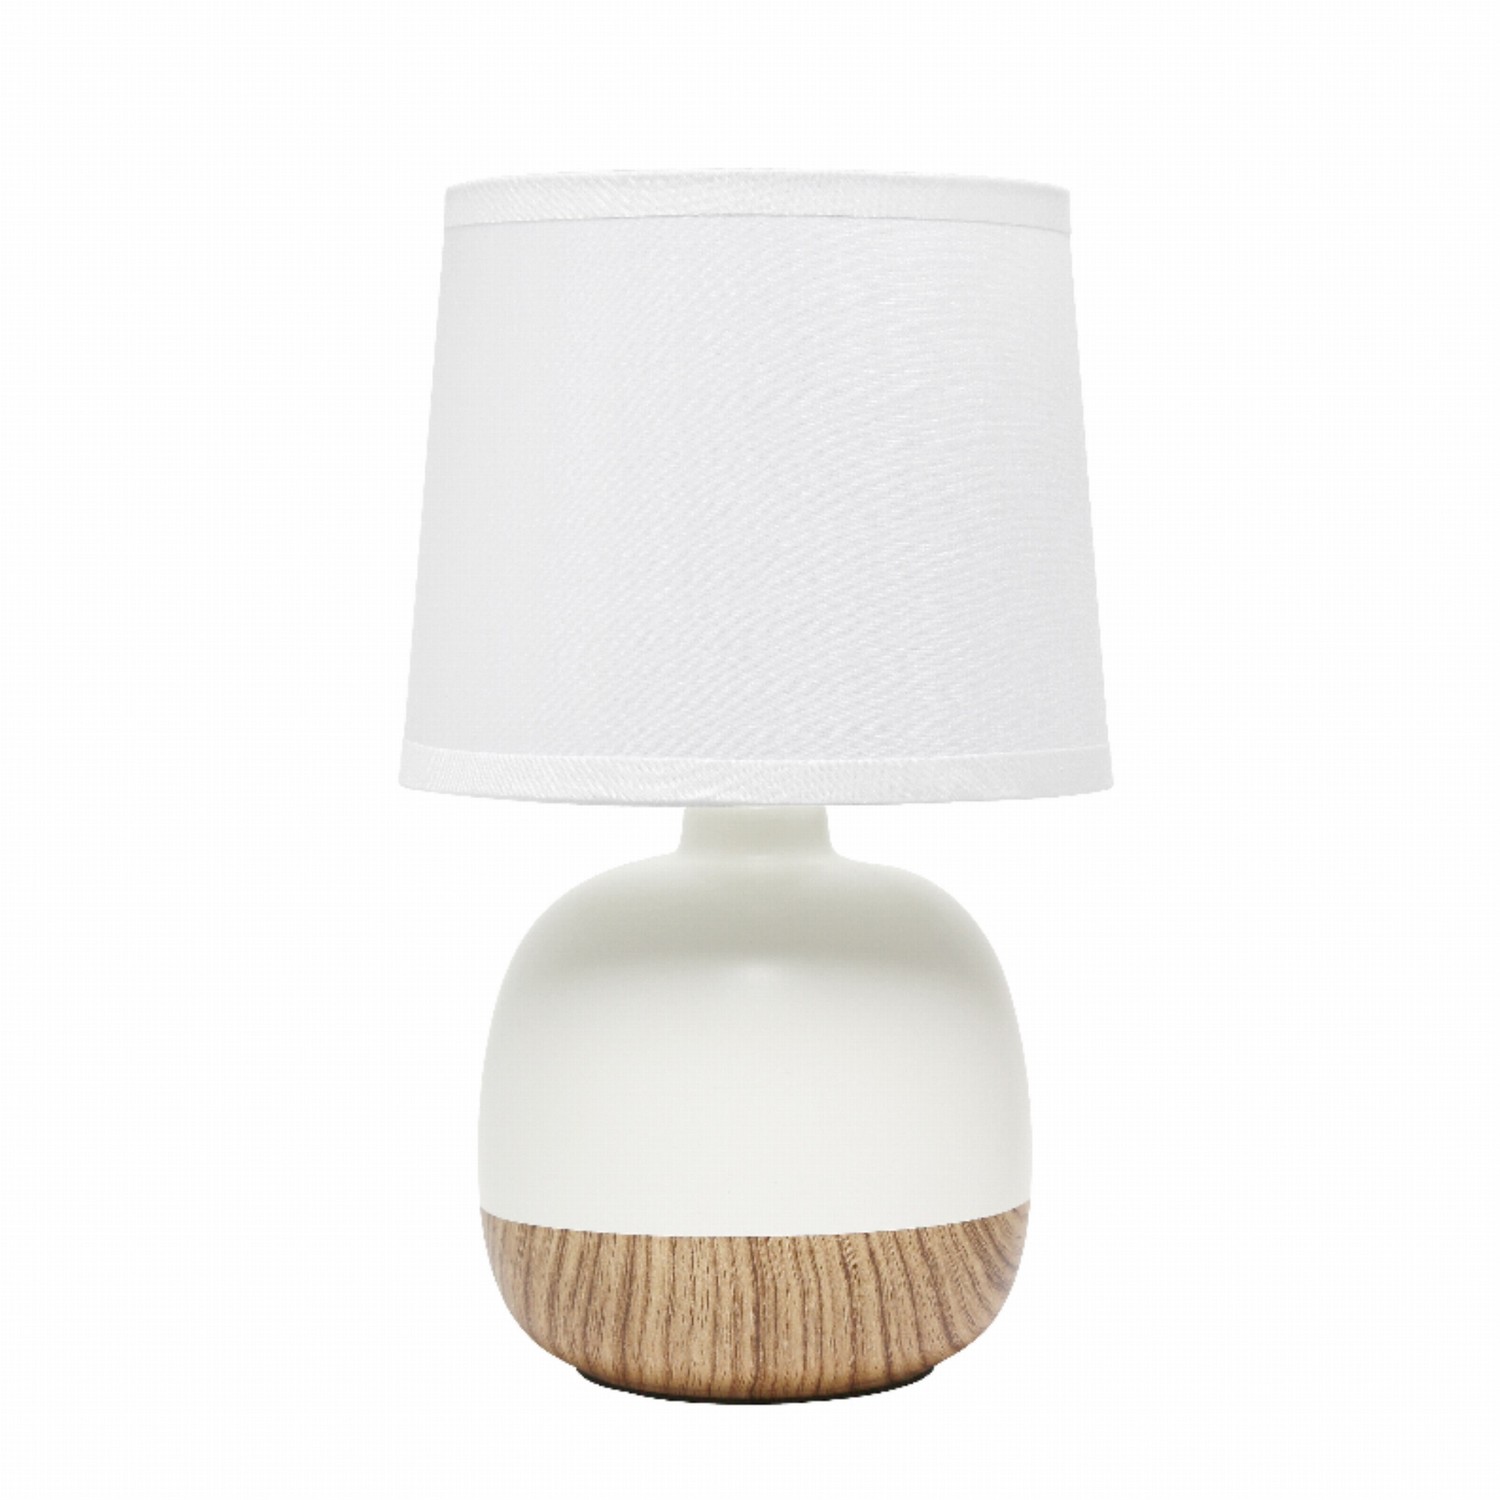 Simple Designs Petite Mid Century Table Lamp, Light Wood and White